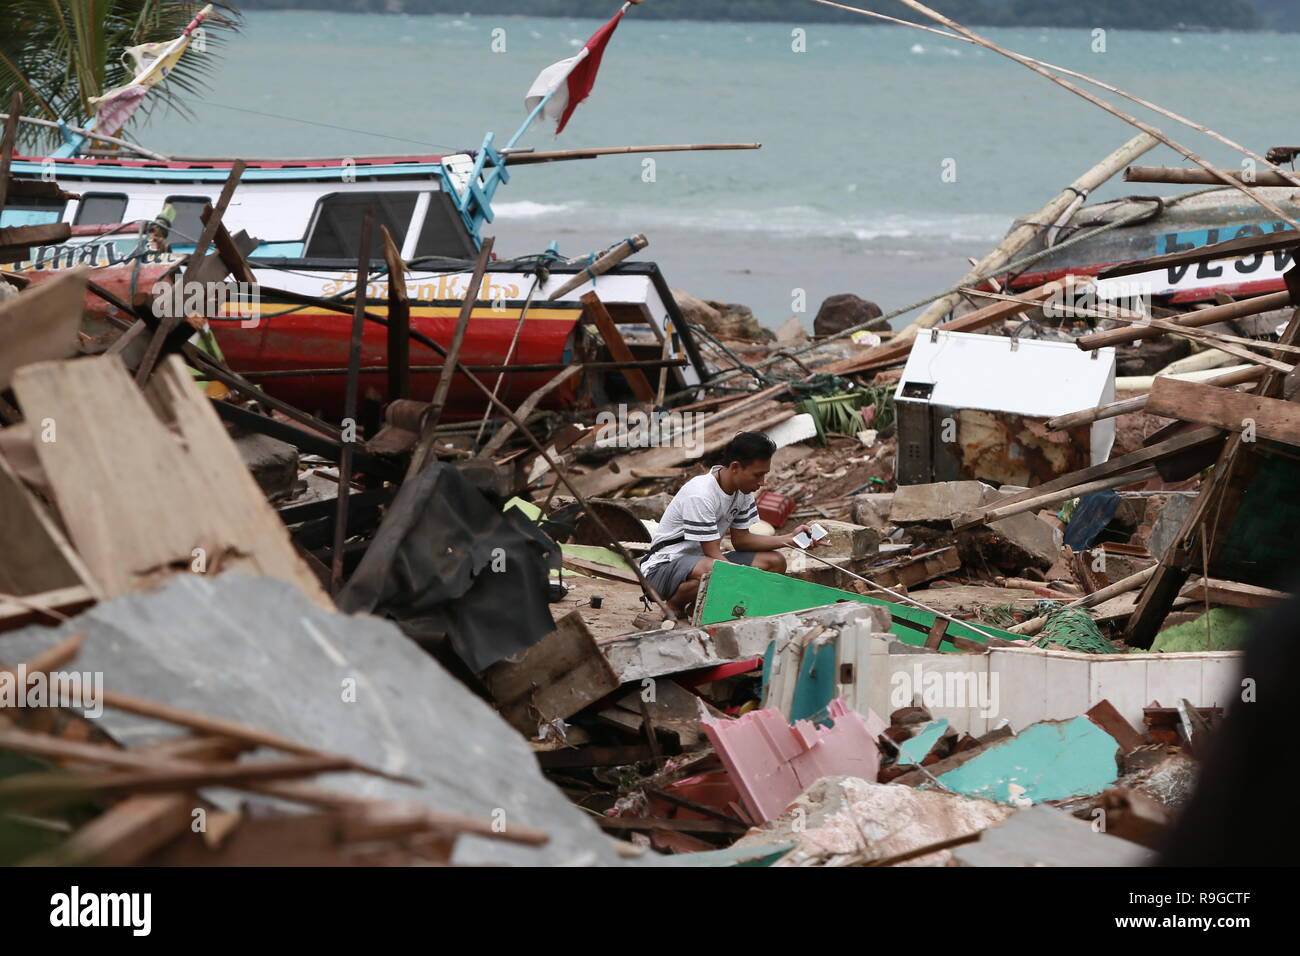 Lampung. 23rd Dec, 2018. A man looks for salvageable items among the debris after a tsunami hit beach at Rajabasa Village in South Lampung, Indonesia, Dec. 23. 2018. The death toll from a volcano-triggered tsunami in Indonesia rose to 222 with at least 843 others injured, the disaster management agency confirmed on Sunday, while the figures are feared to mount as damage verification goes on. Credit: Langit/Xinhua/Alamy Live News Stock Photo